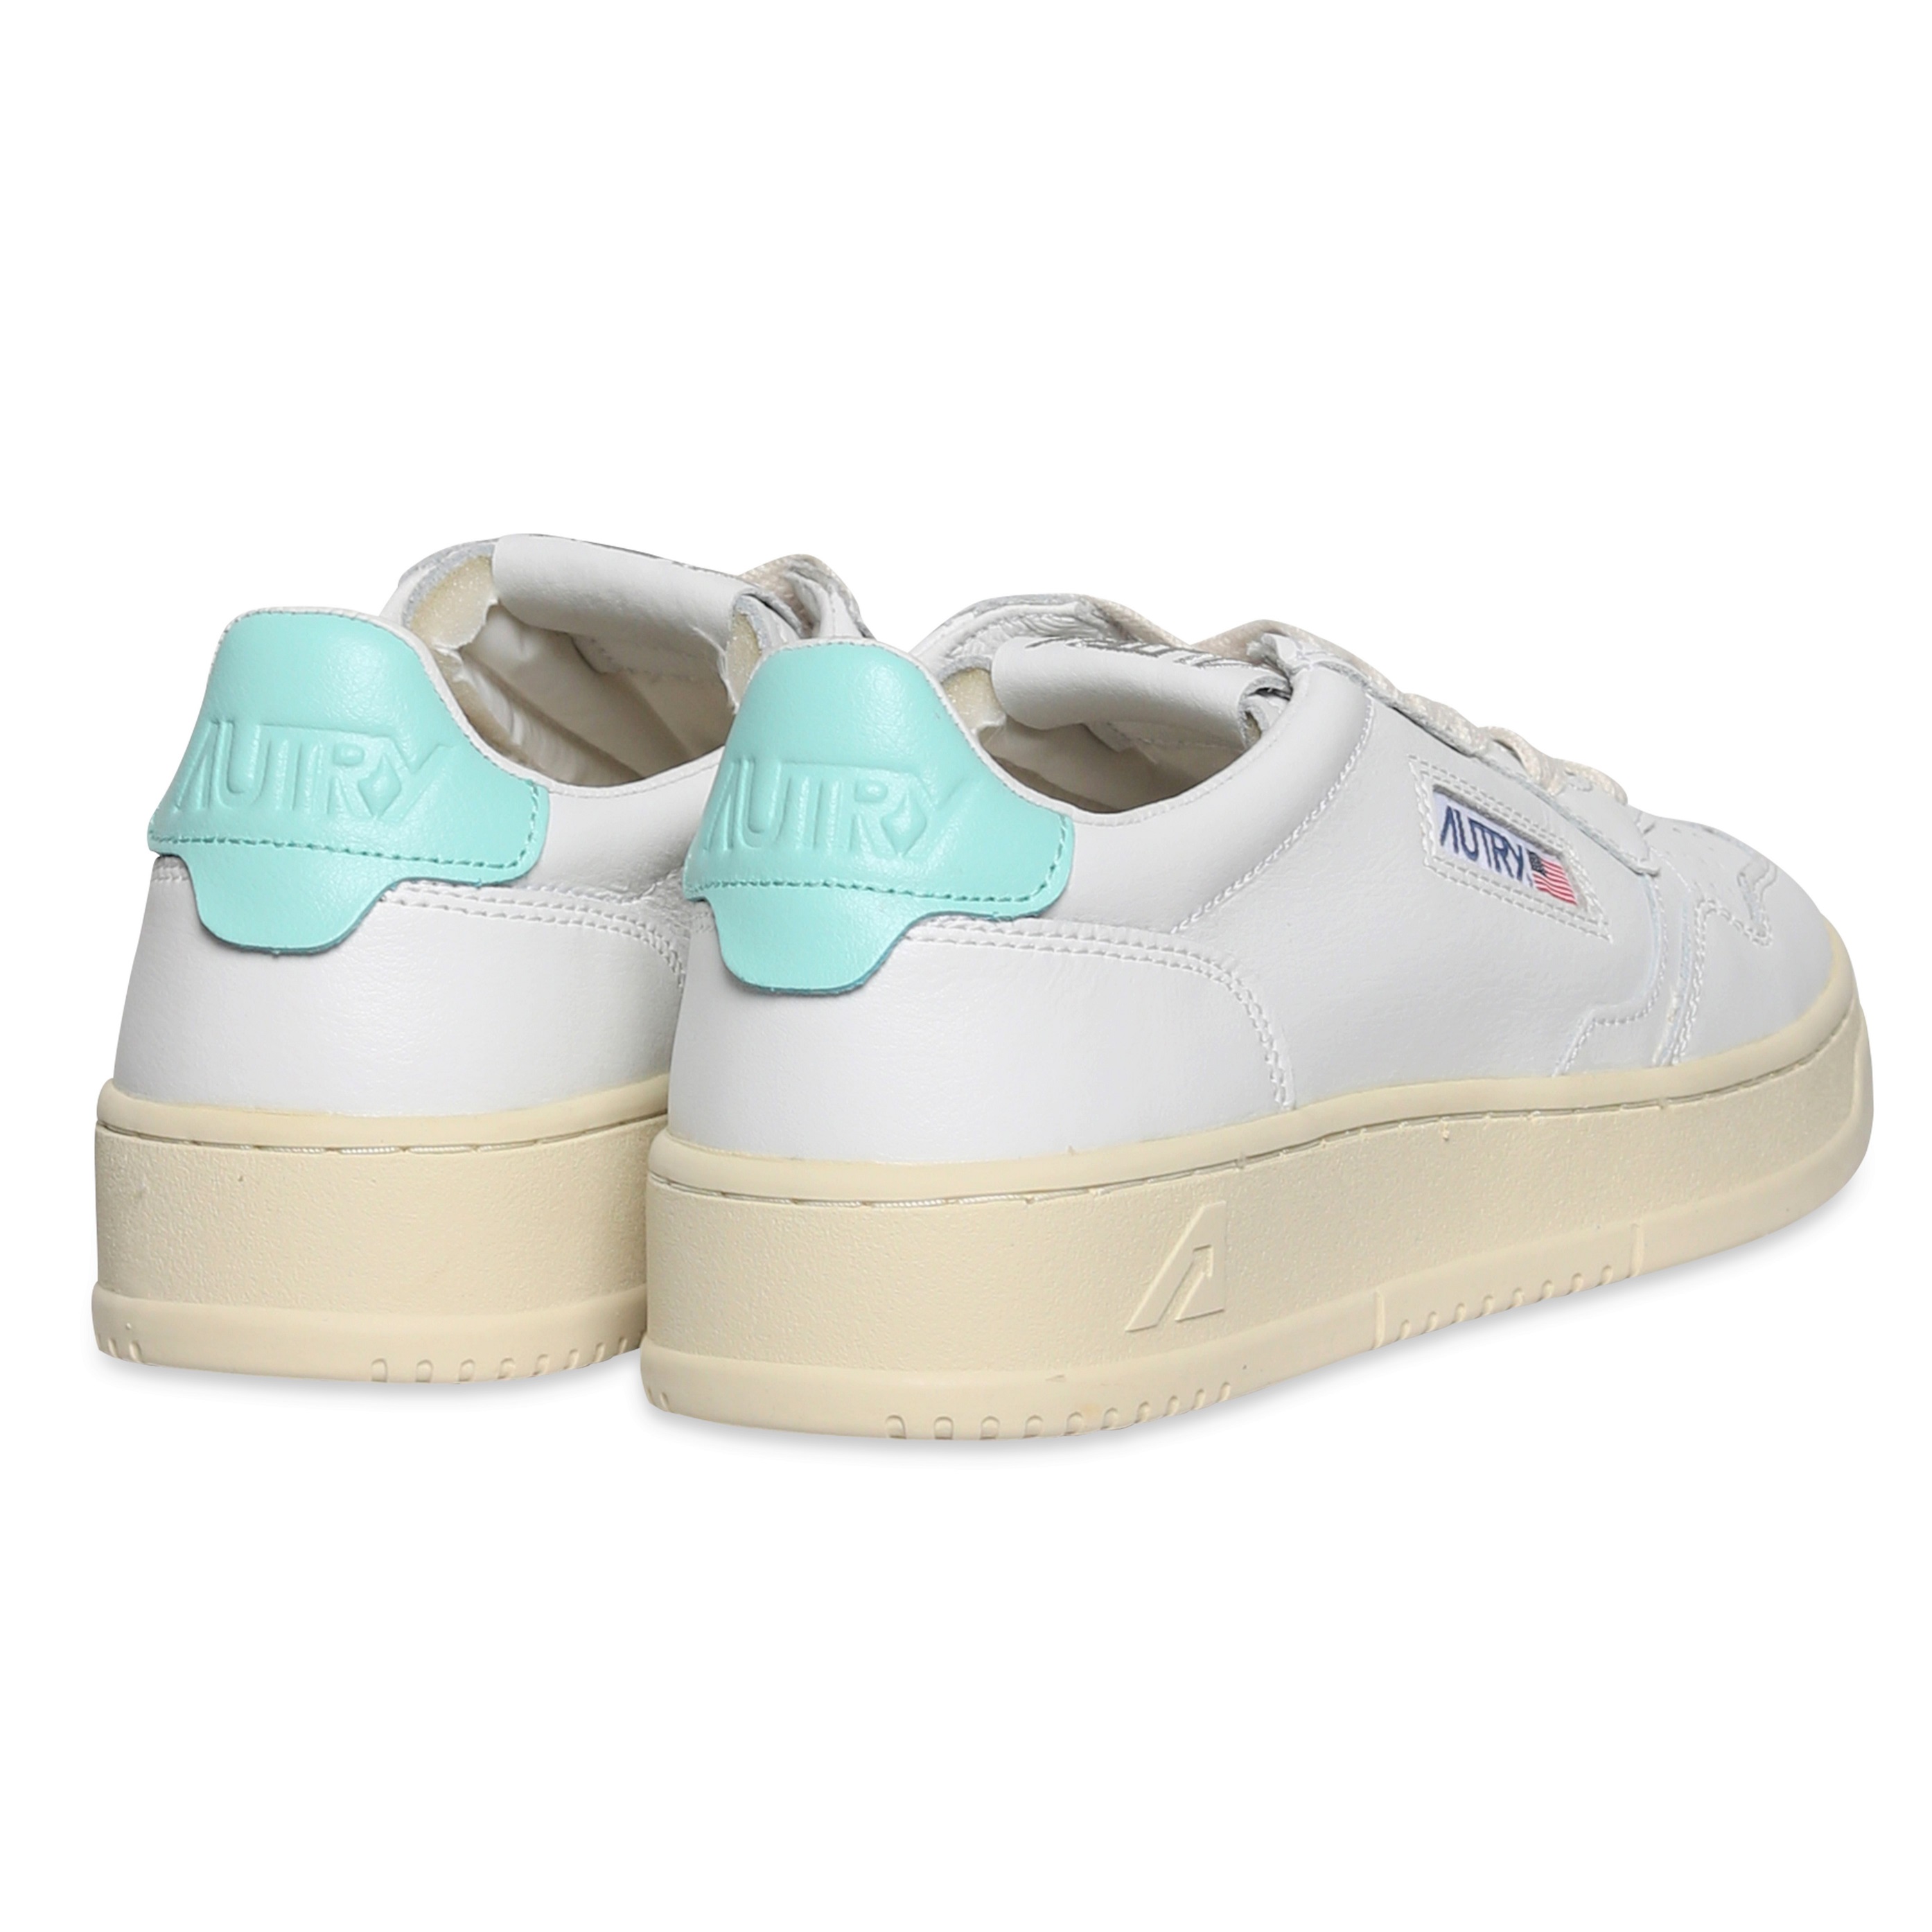 Autry Action Shoes Low Sneaker White/Pink 39